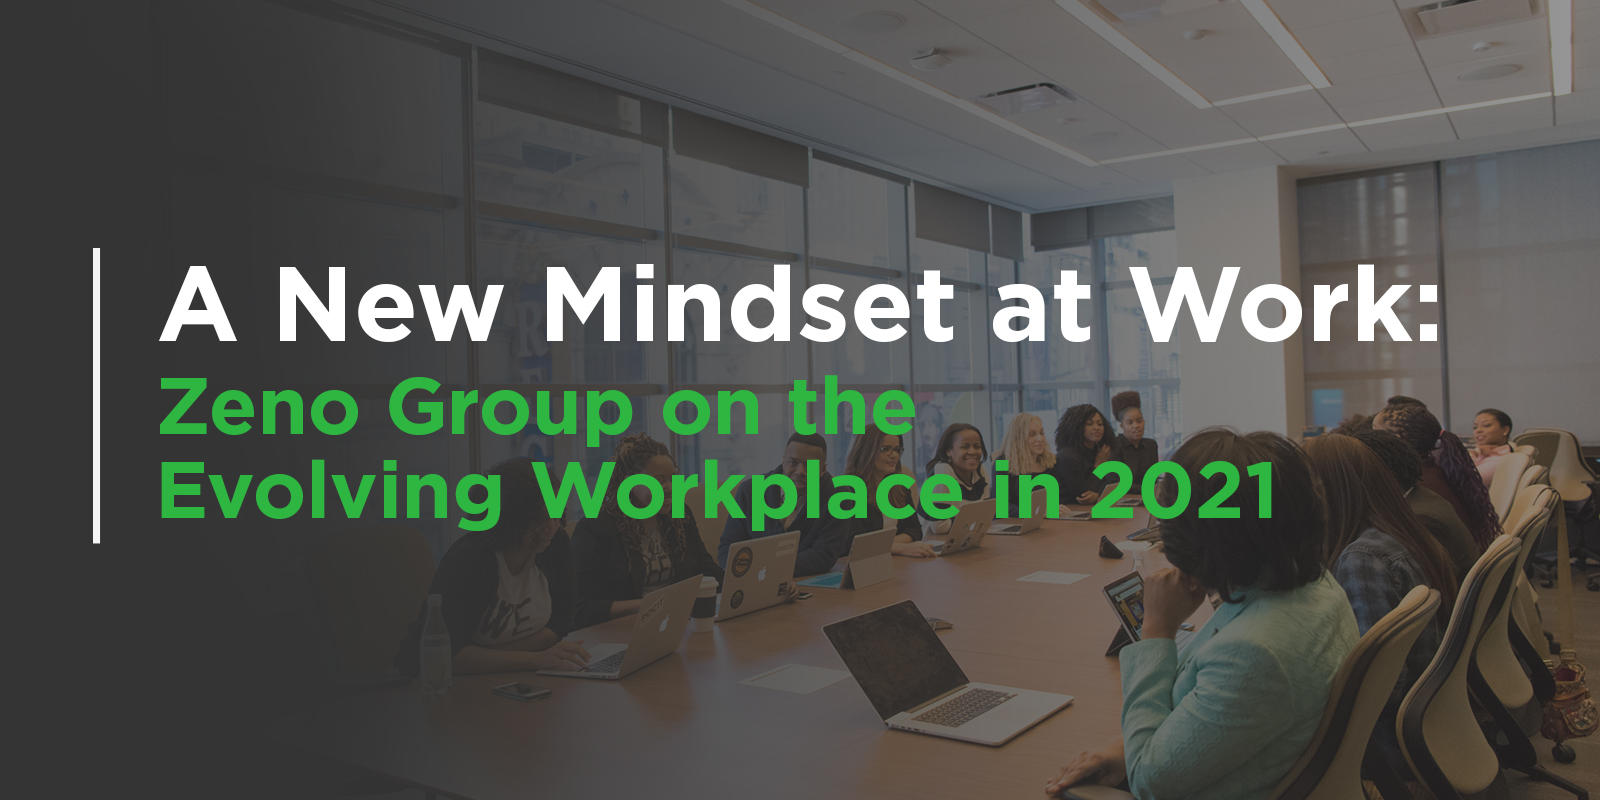 Banner photo that says 'A New Mindset at Work: Zeno Group on the Evolving Workplace in 2021'